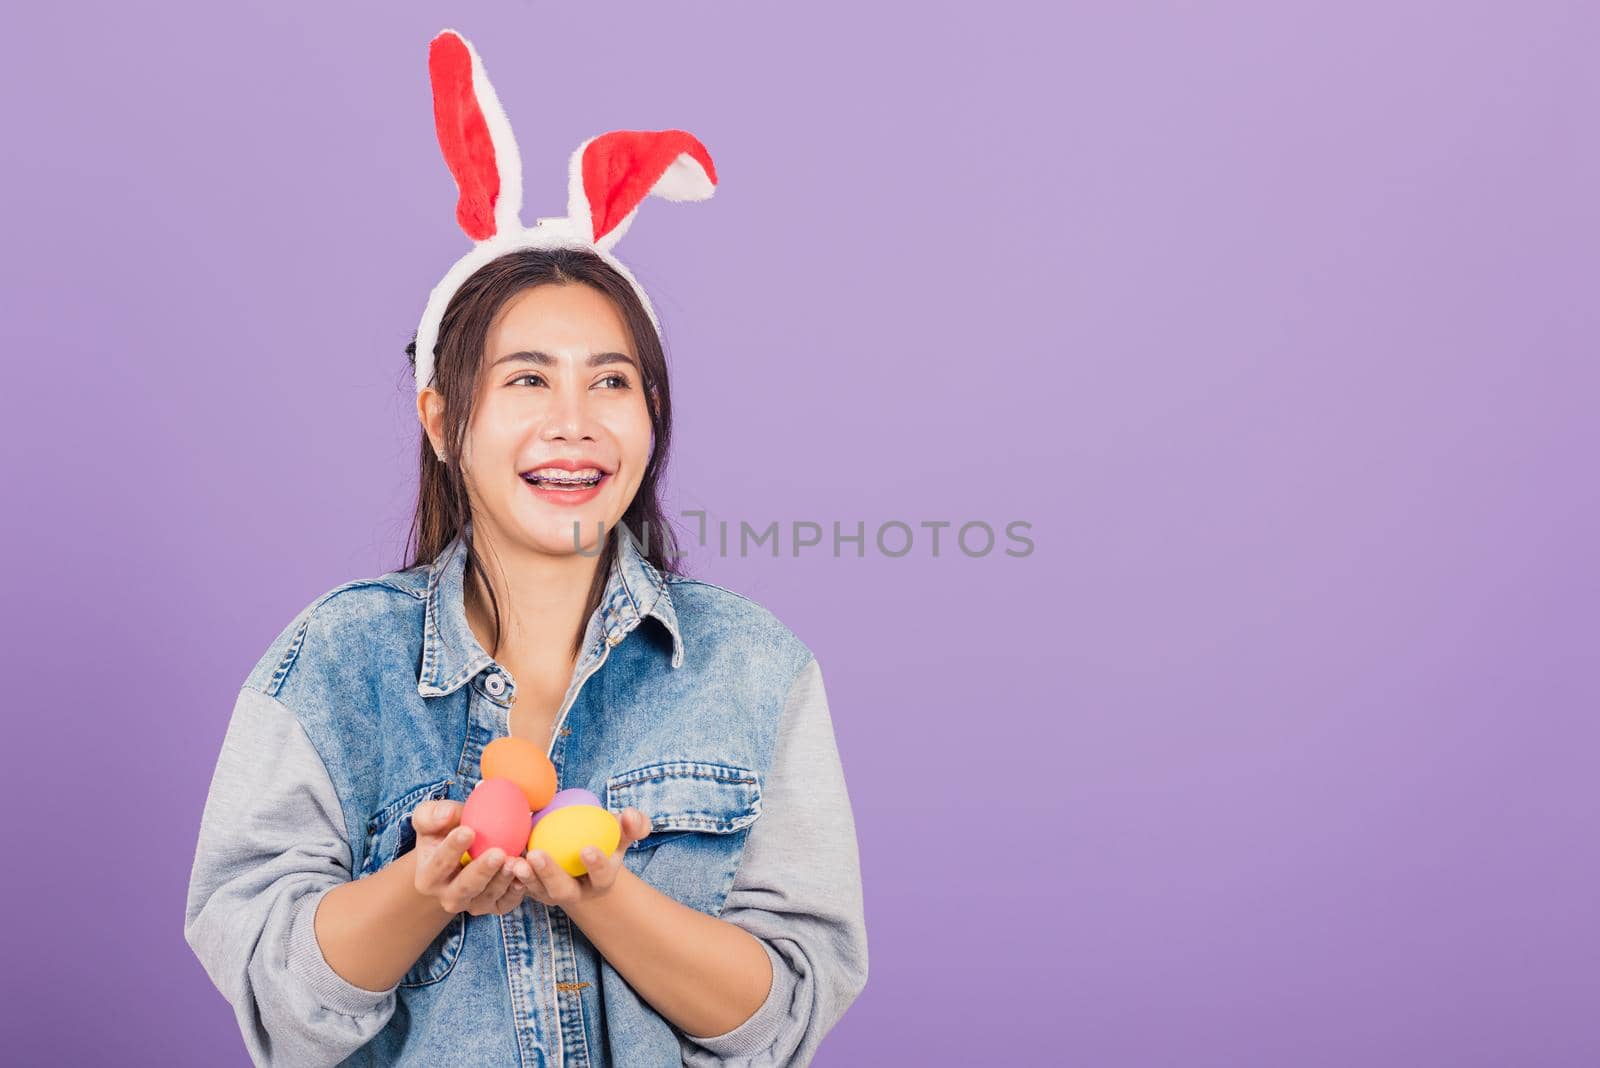 Happy Easter concept. Beautiful young woman smiling wearing rabbit ears and denims hold colorful Easter eggs gift on hands, Portrait female looking at side, studio shot isolated on purple background